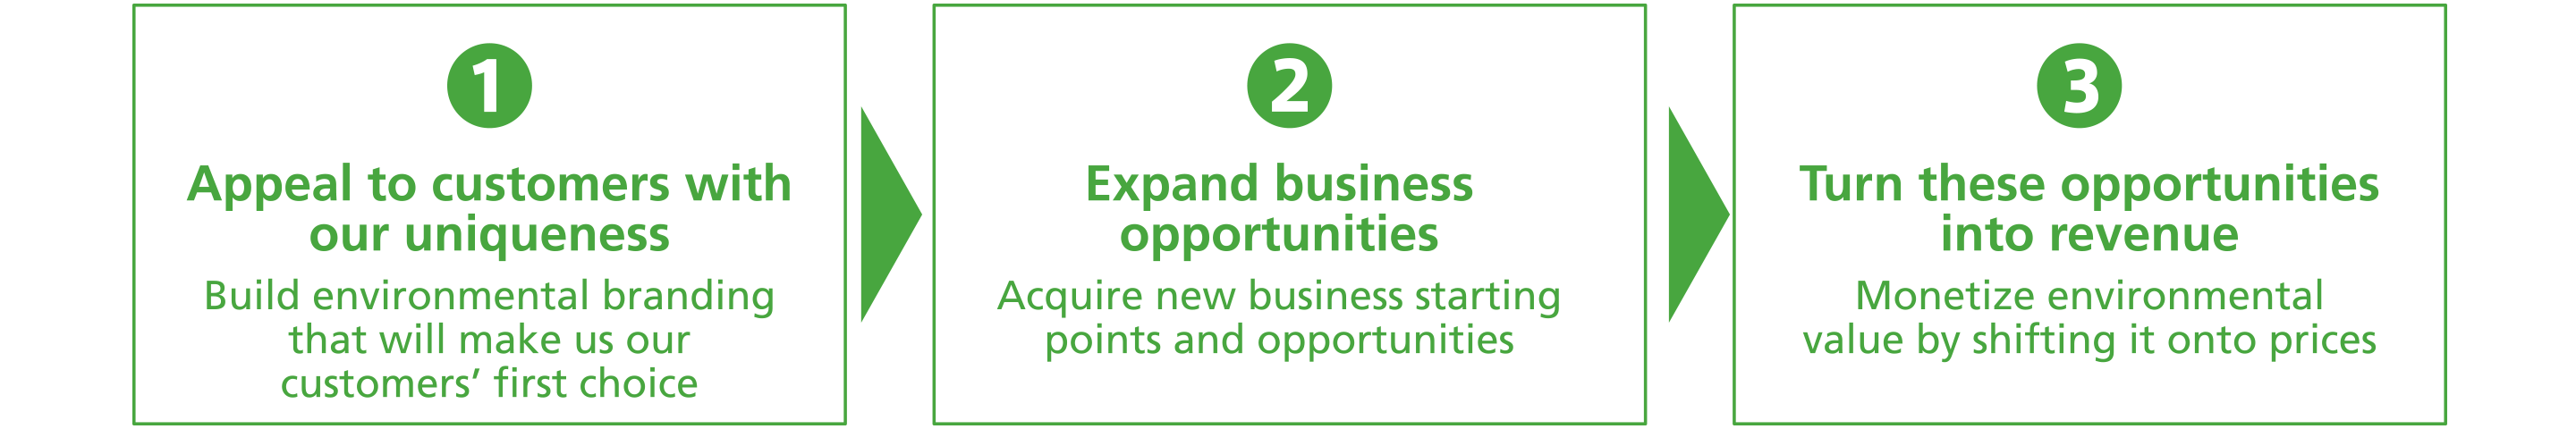 1.Appeal to customers with our uniqueness: Build environmental branding that will make us our customers' first choice 2.Expand business opportunities: Acquire new business starting points and opportunities 3.Turn these opportunities into revenue: Monetize environmental value by shifting it onto prices